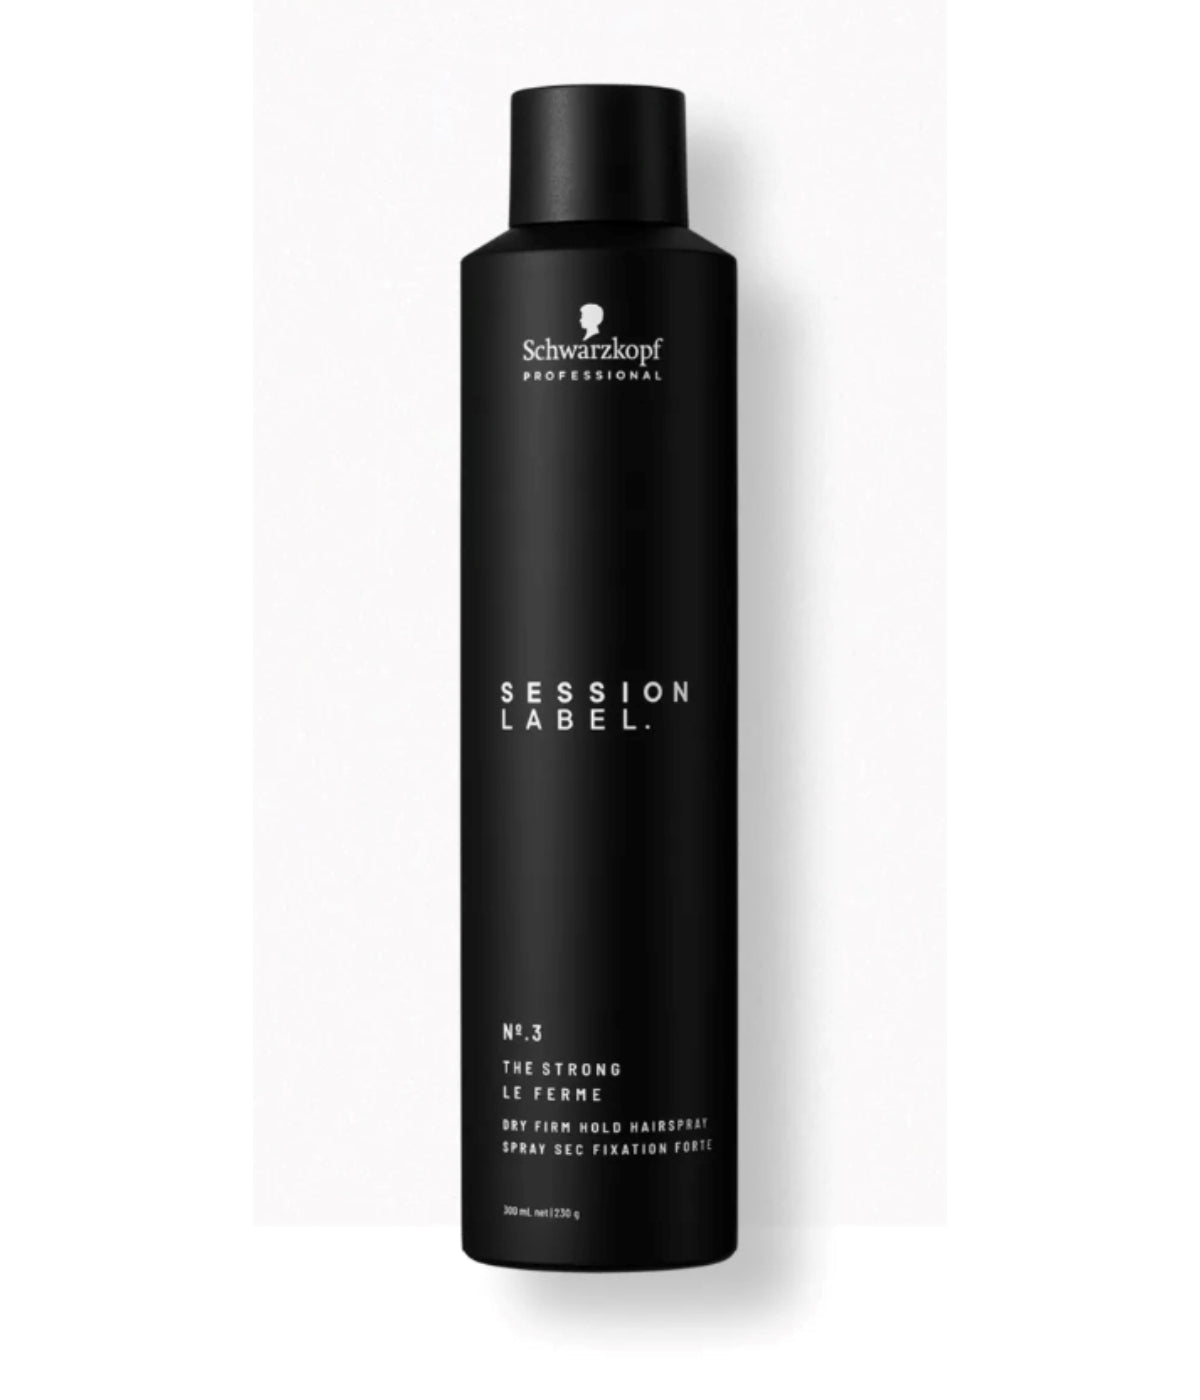 Schwarzkopf Osis+ Session Label The Strong Firm Hold Hairspray, 300mL - ProCare Outlet by Schwarzkopf